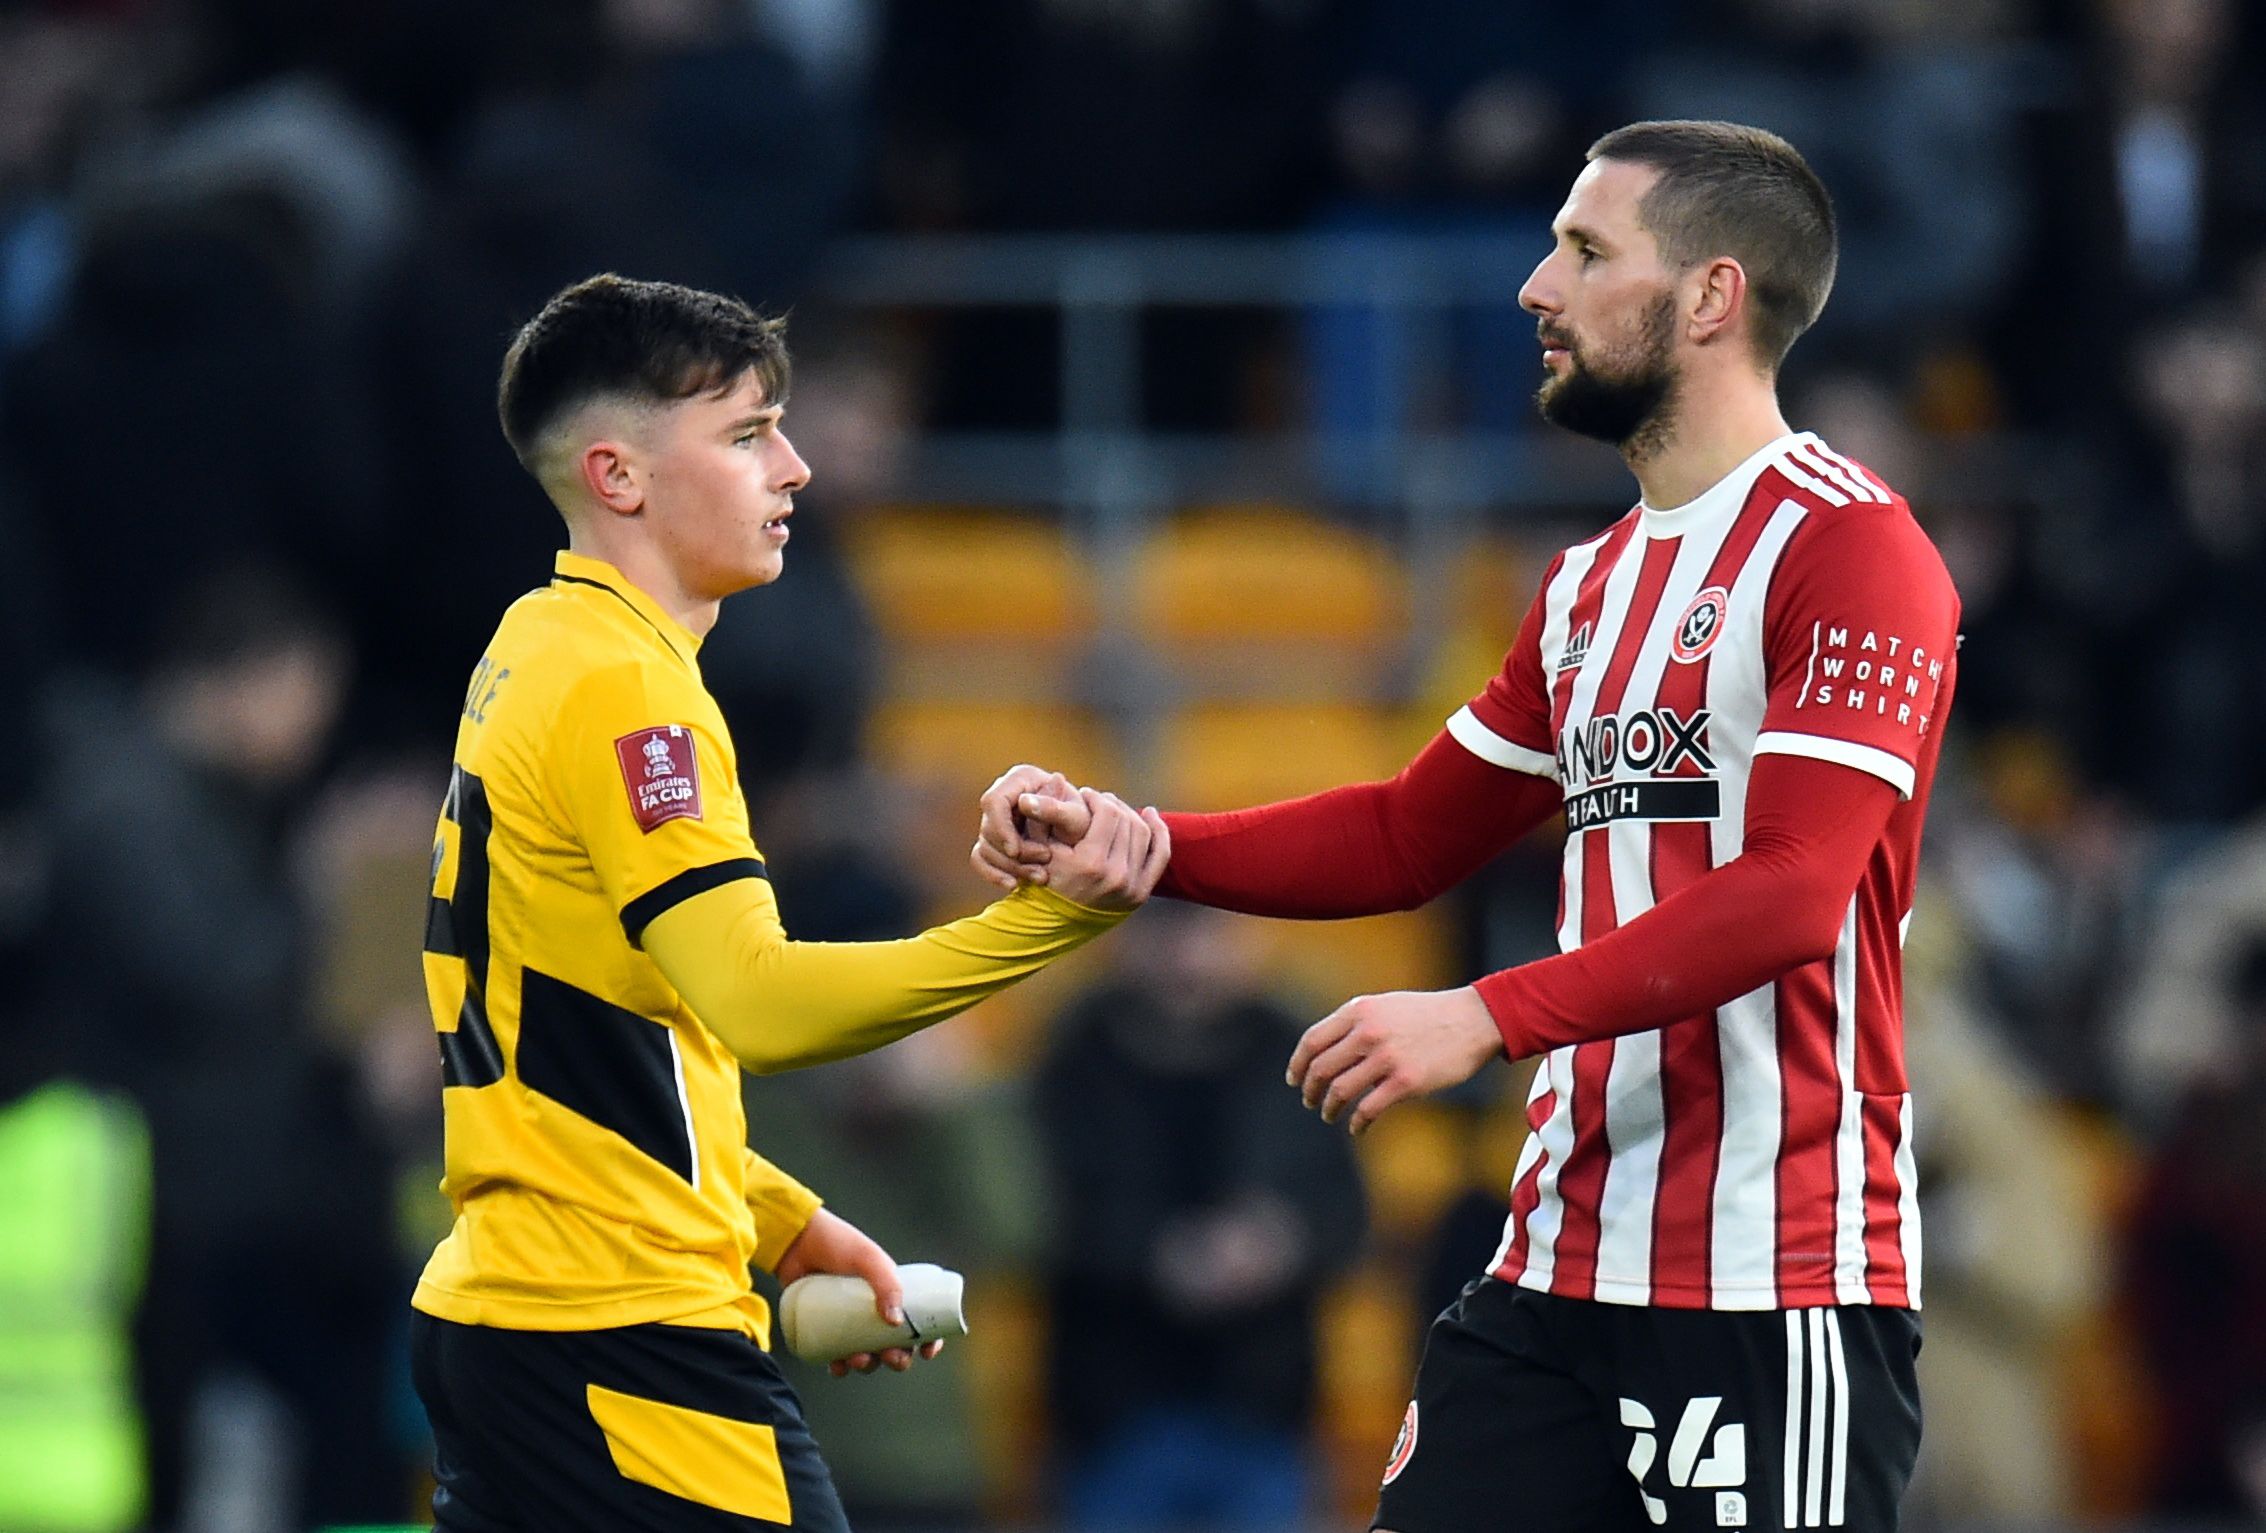 Soccer Football - FA Cup Third Round - Wolverhampton Wanderers v Sheffield United - Molineux Stadium, Wolverhampton, Britain - January 9, 2022 Wolverhampton Wanderers' Luke Cundle shakes hands with Sheffield United's Conor Hourihane after the match REUTERS/Peter Powell